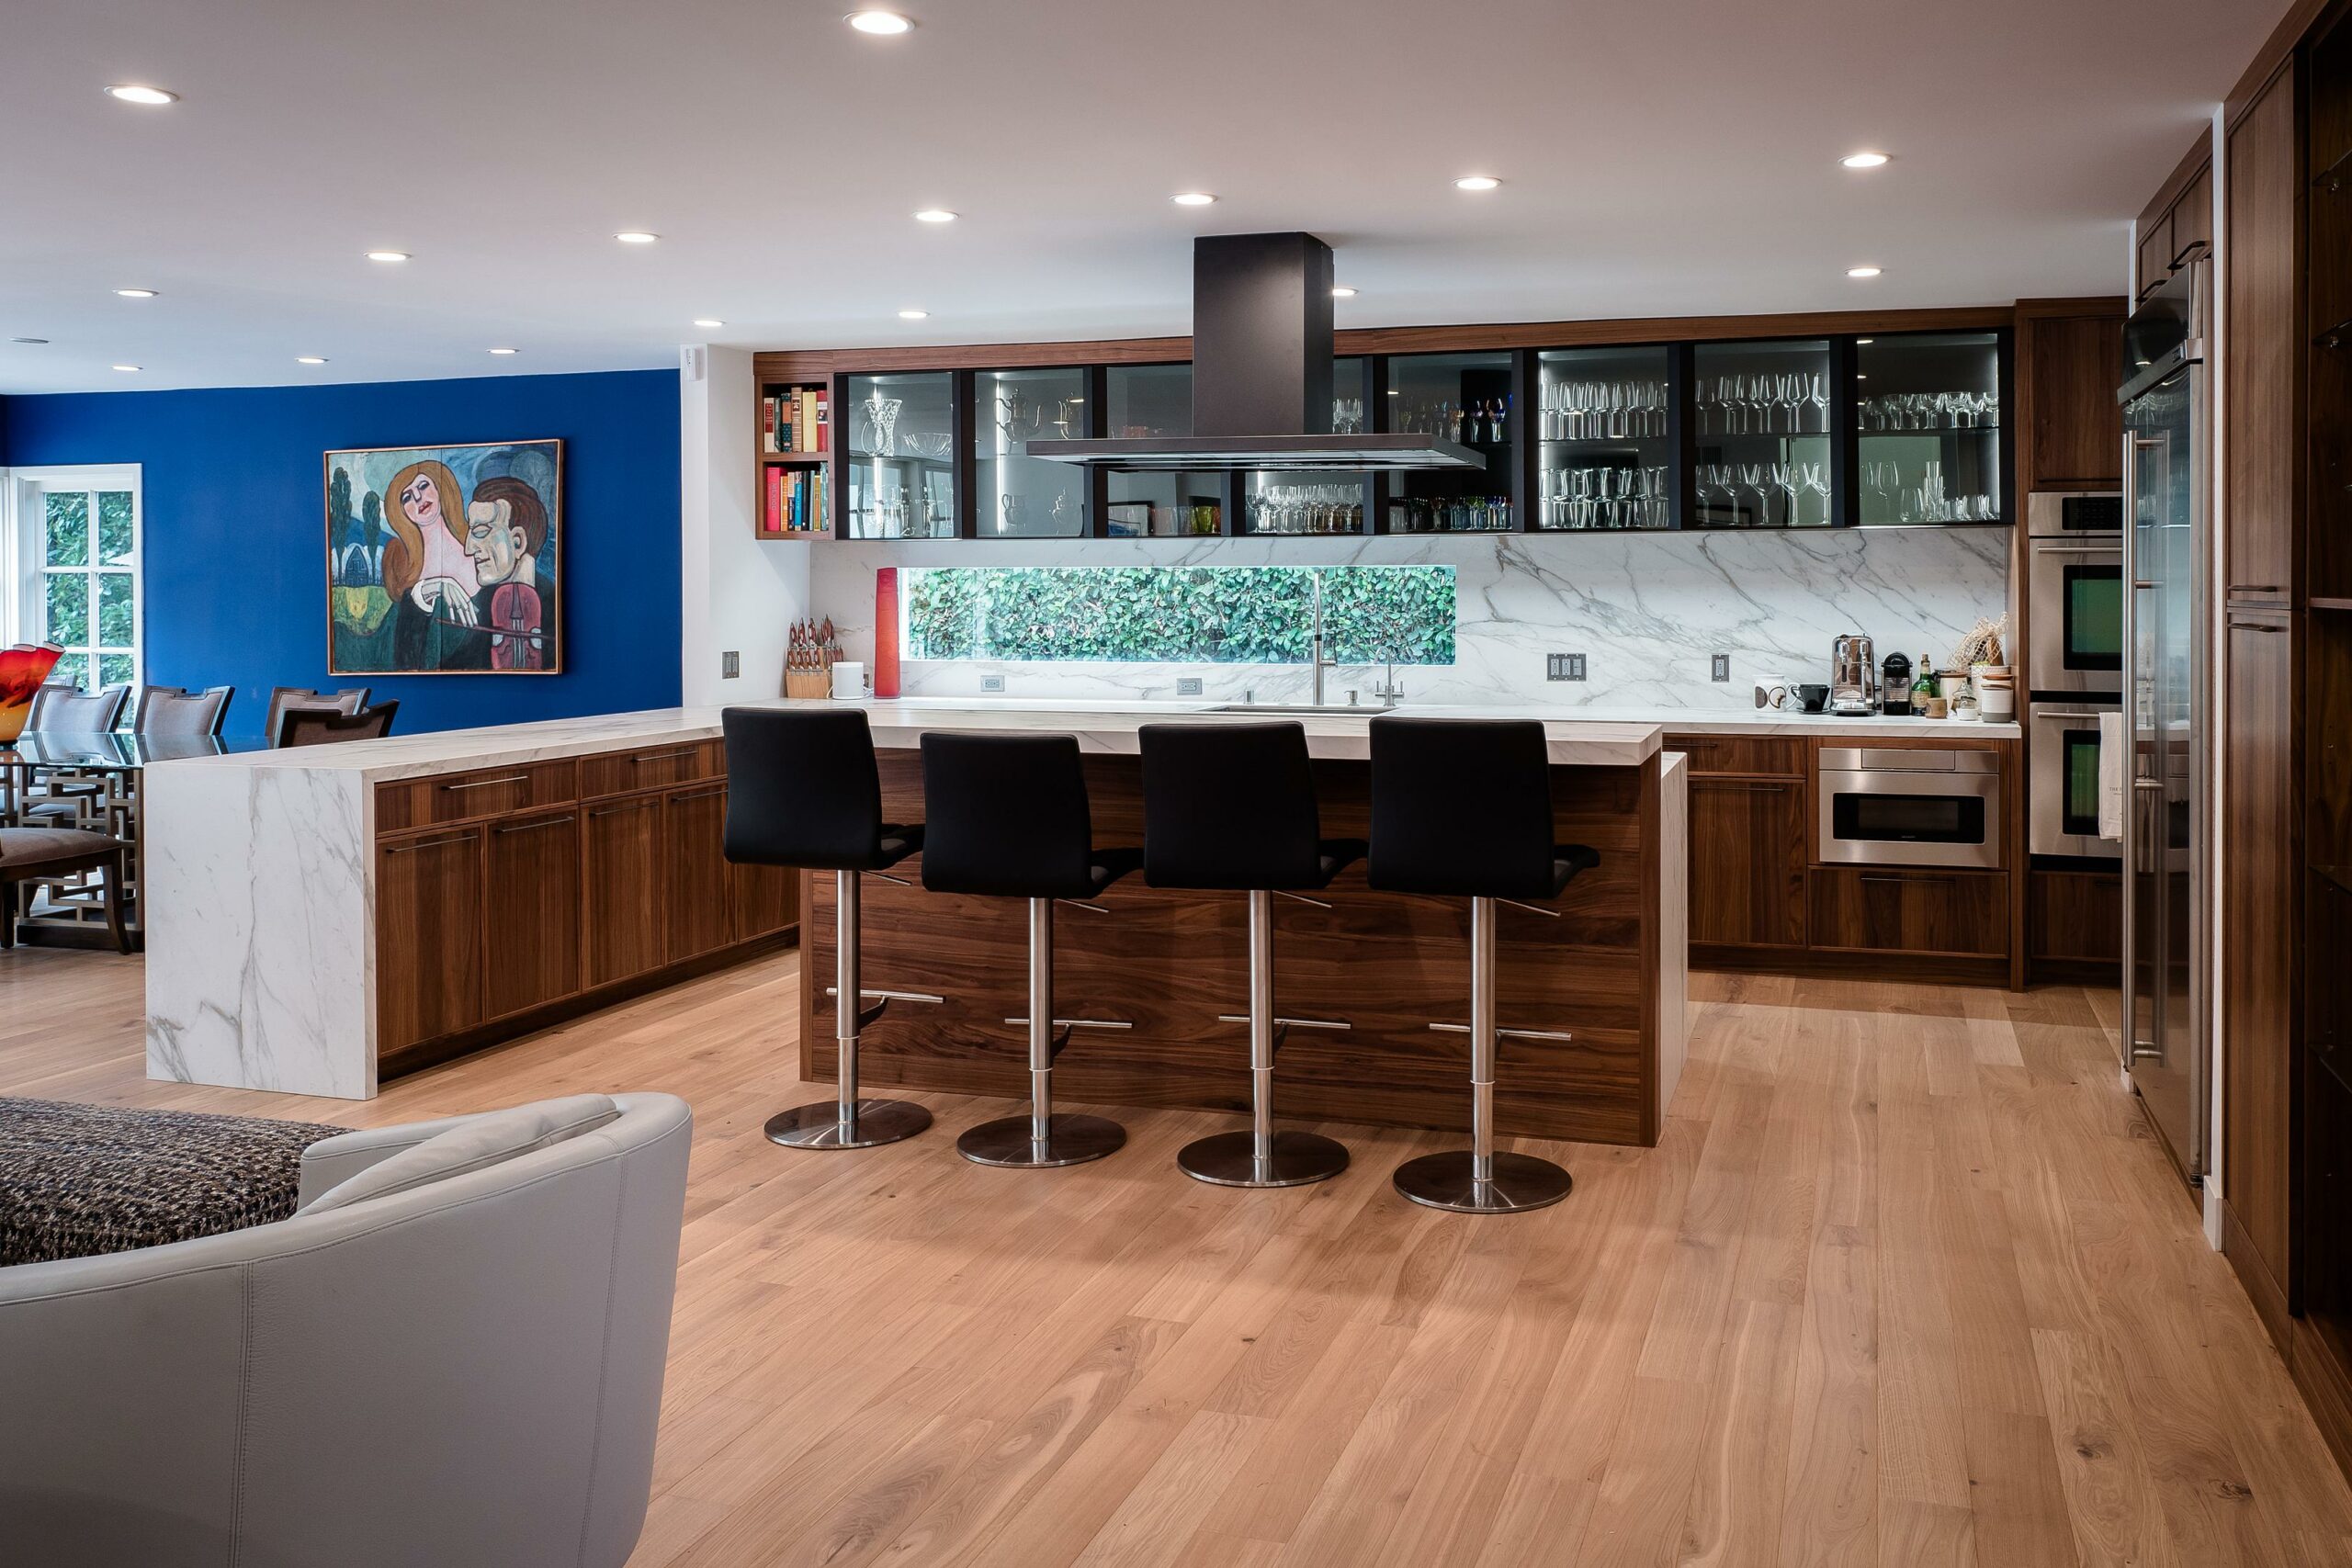 Modern kitchen interior with island and bar stools.